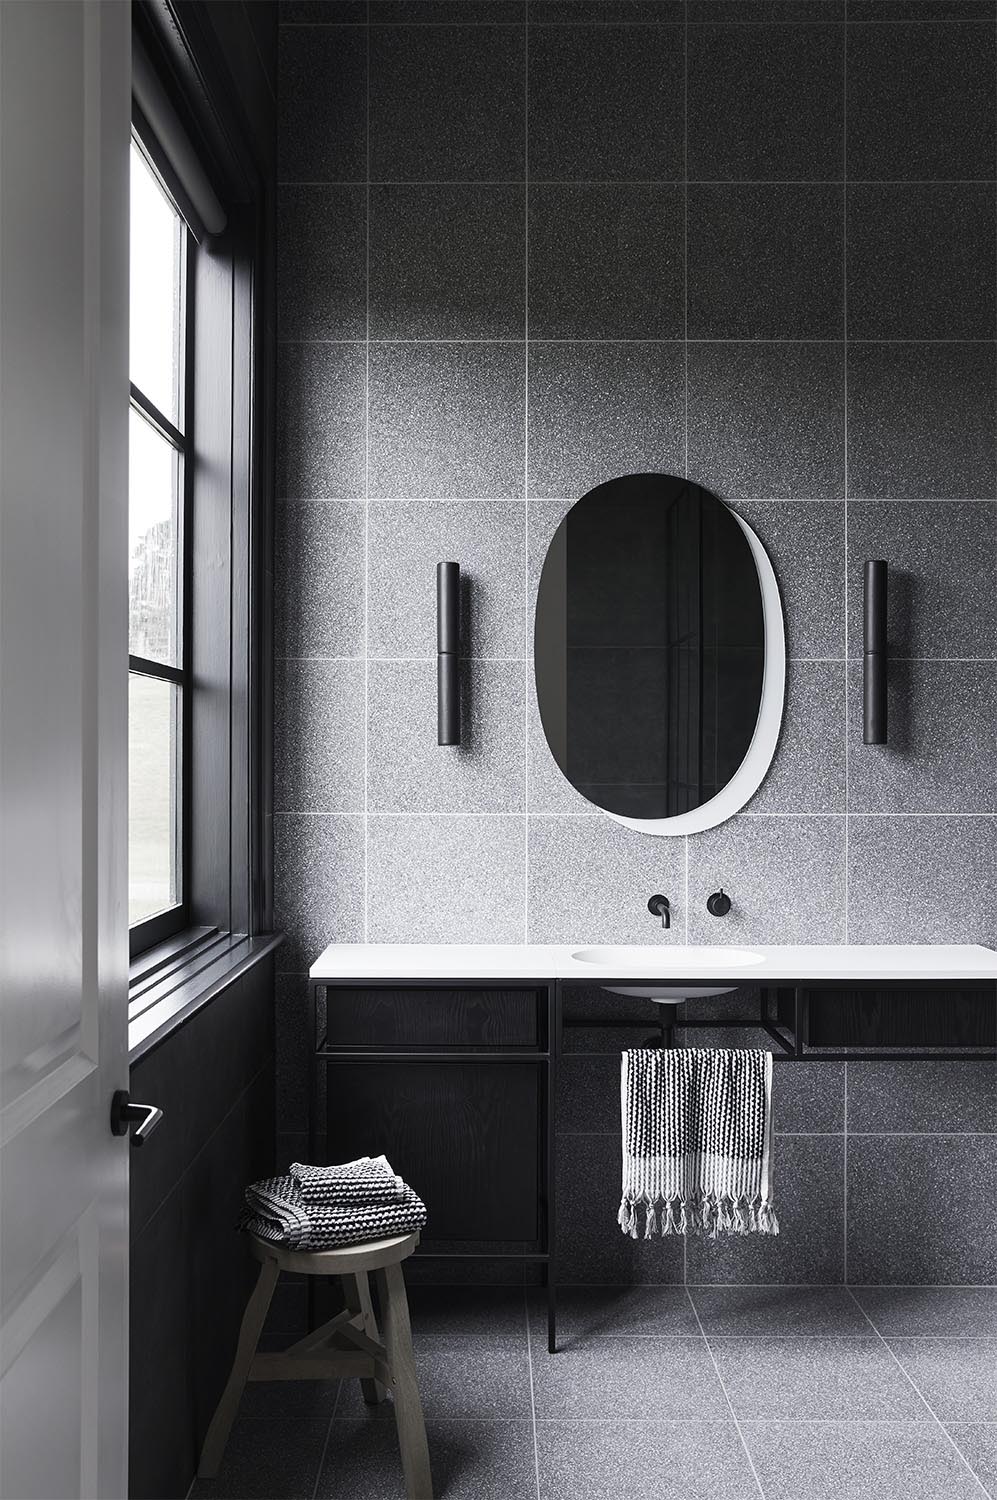 The extremely minimalist and slimline consoles by Ex.t, have black steel frames with white countertops and integrated basins, adding a lightness to the otherwise dark bathrooms.